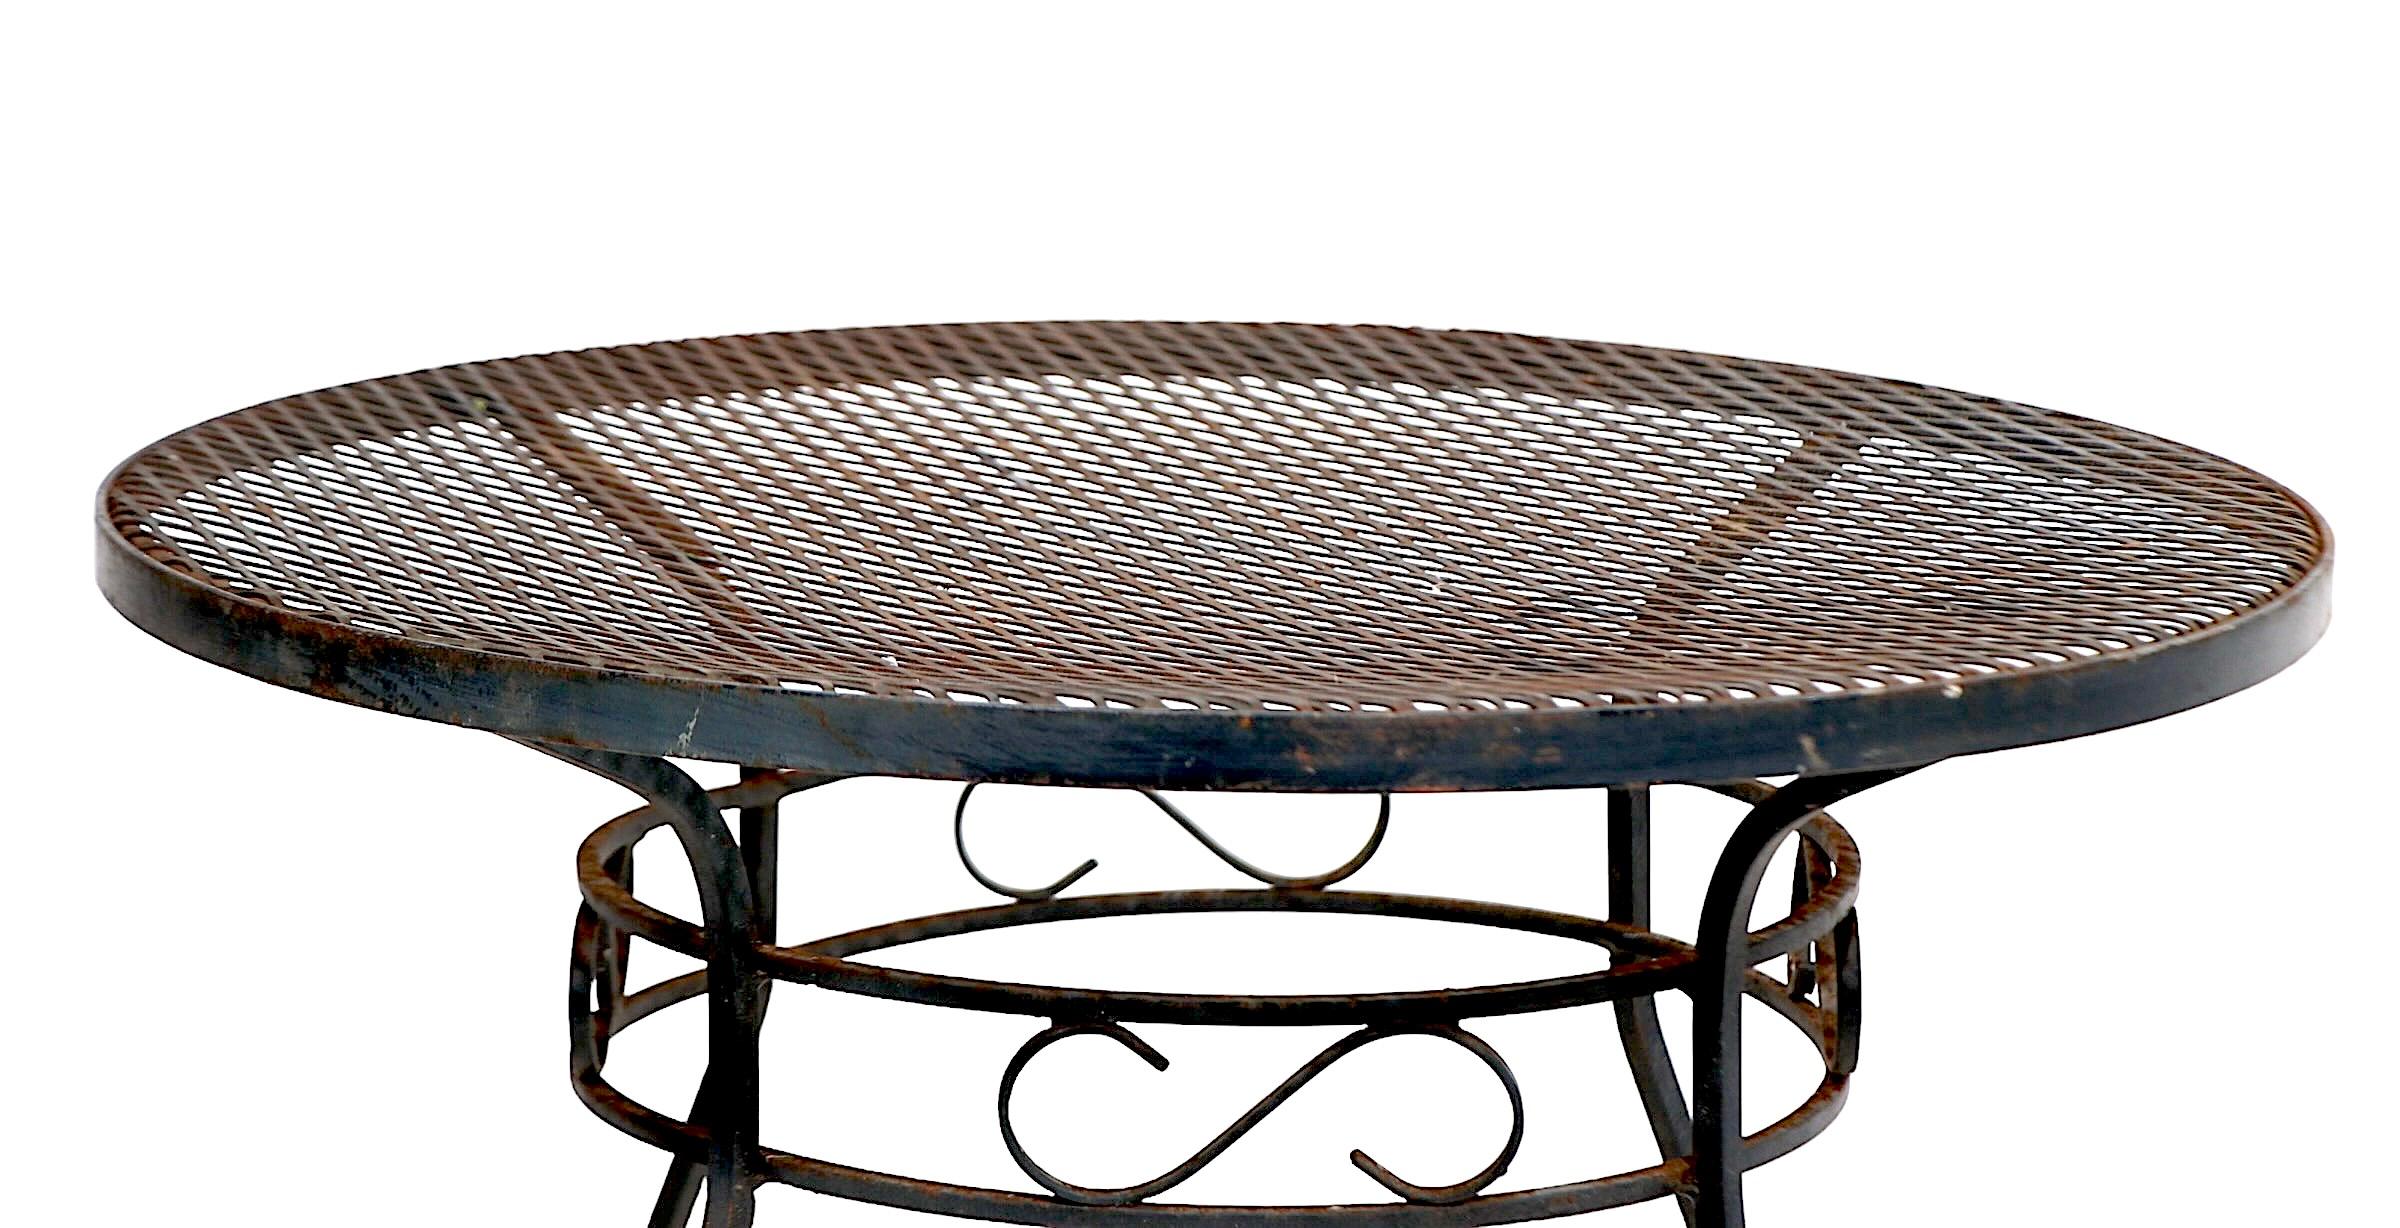  Small Wrought Iron  Garden Patio Poolside Table by Woodard c. 1940/60's For Sale 1